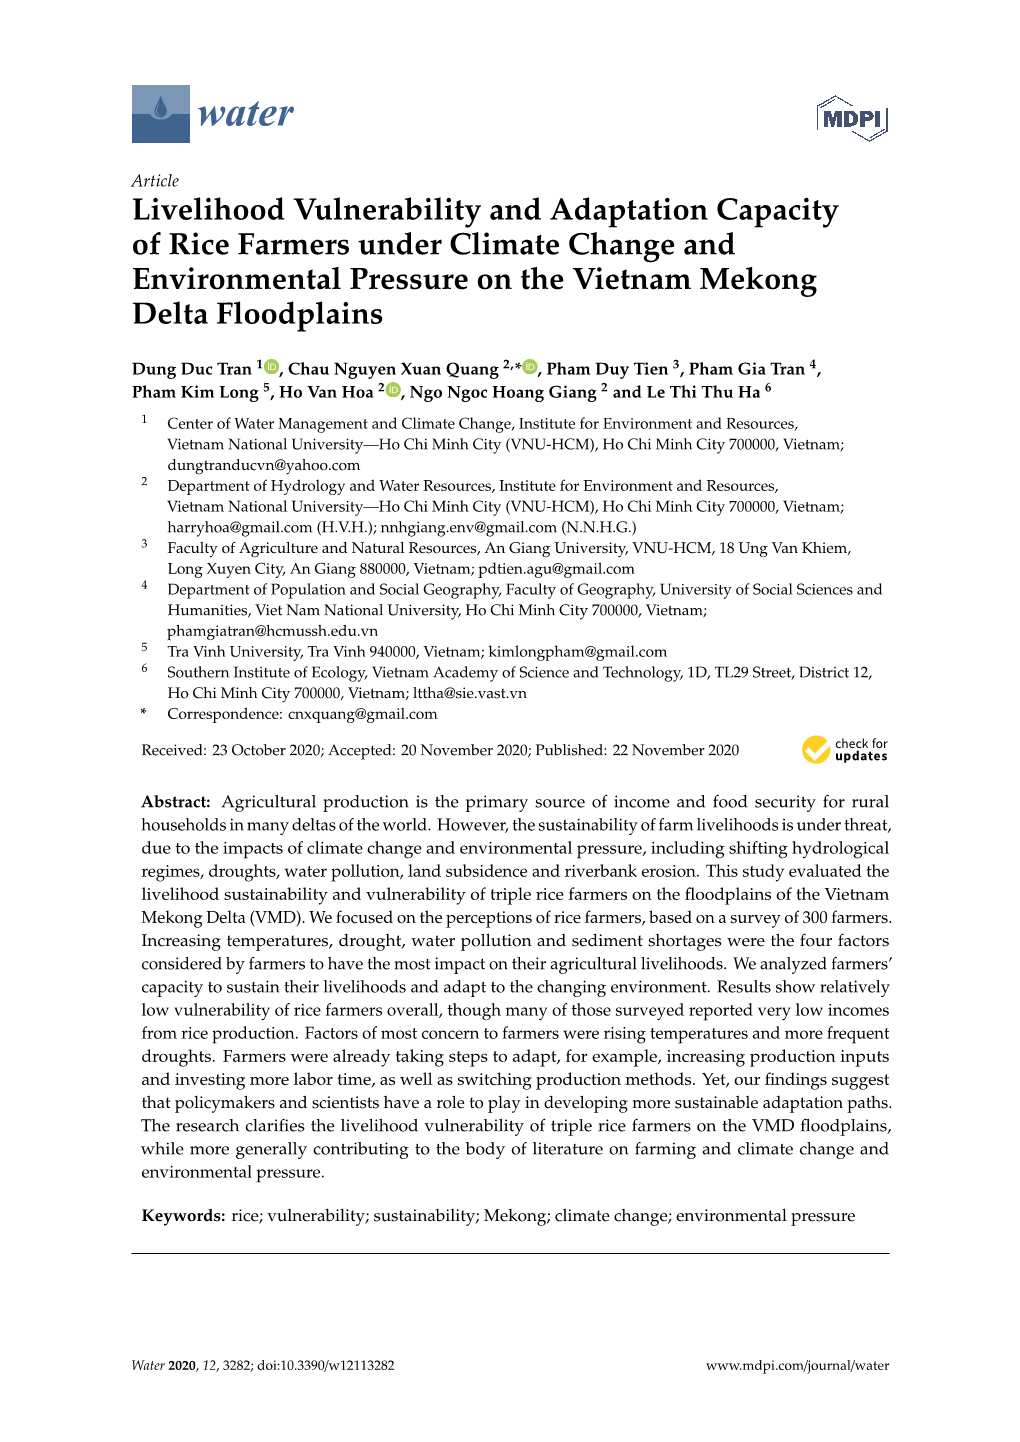 Livelihood Vulnerability and Adaptation Capacity of Rice Farmers Under Climate Change and Environmental Pressure on the Vietnam Mekong Delta Floodplains